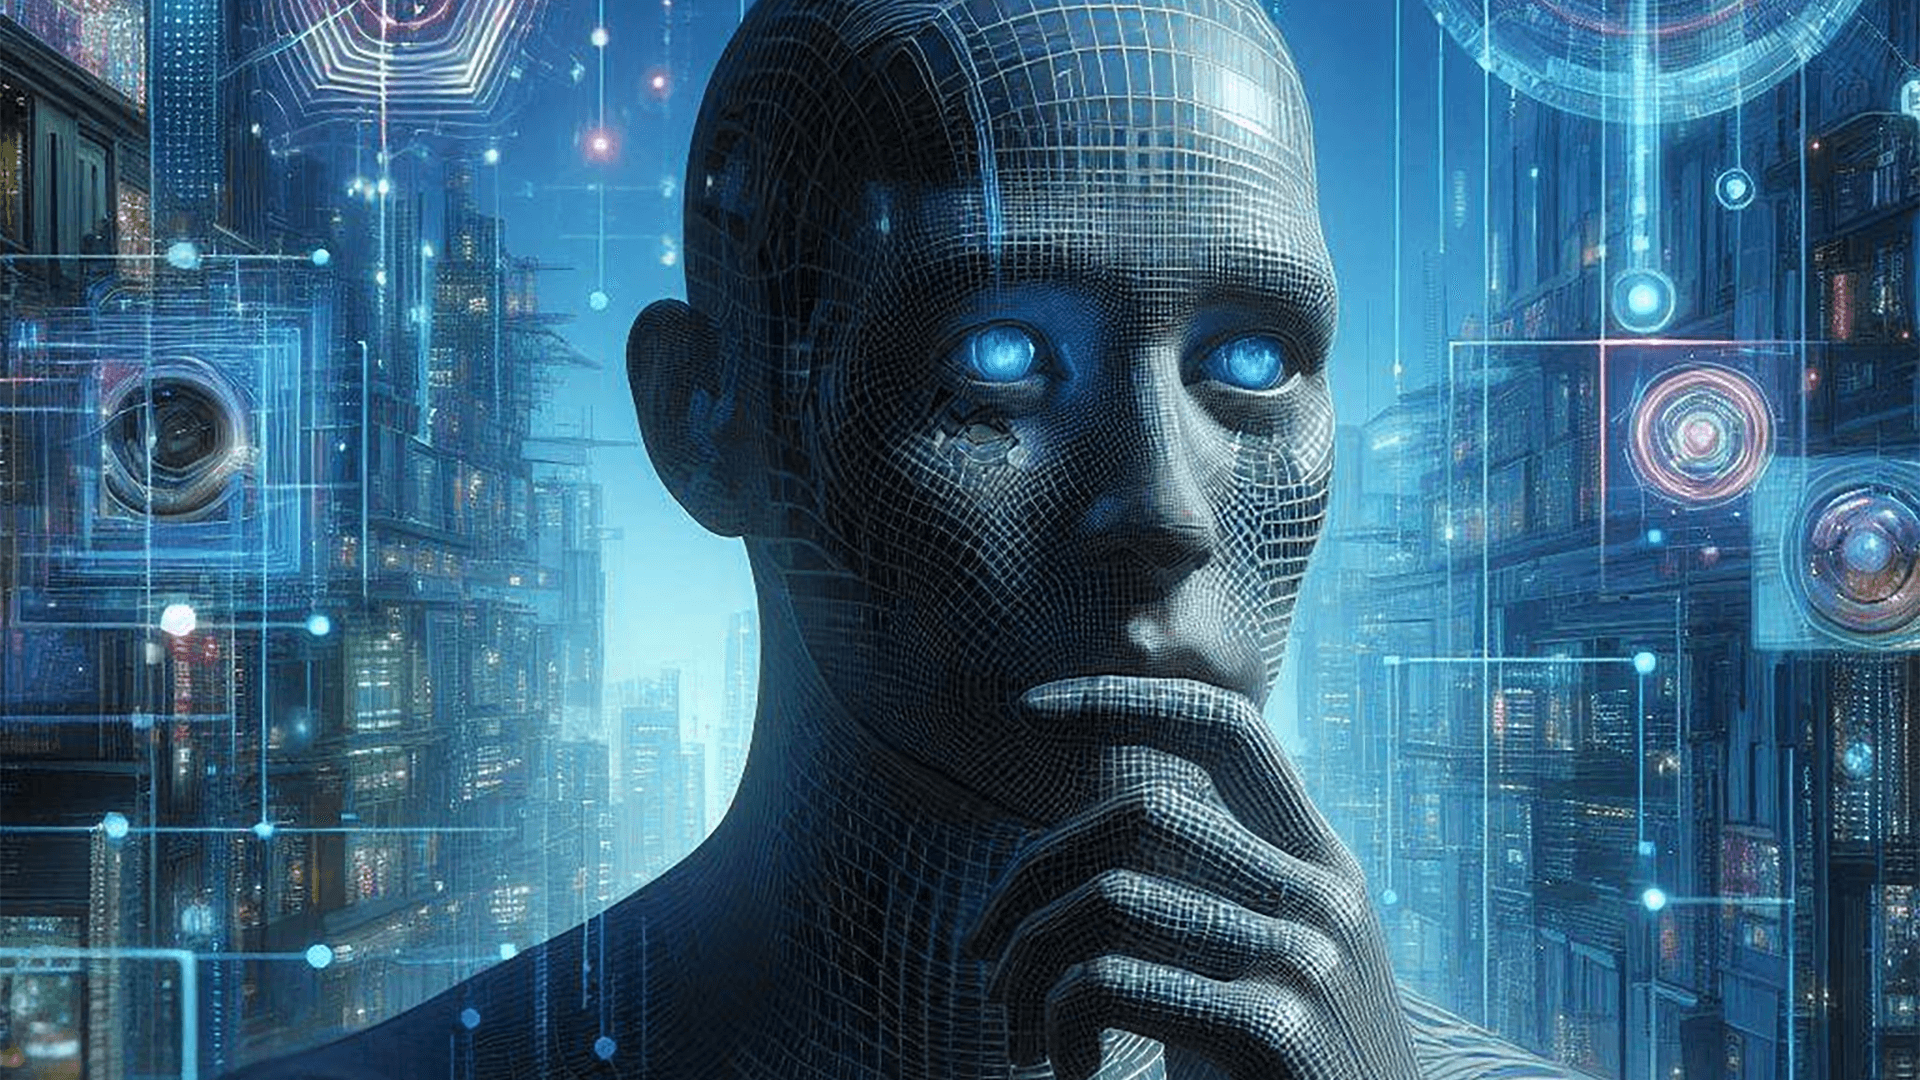 Futuristic concept art of a human figure in deep thought, surrounded by abstract symbols representing the Internet and technology.